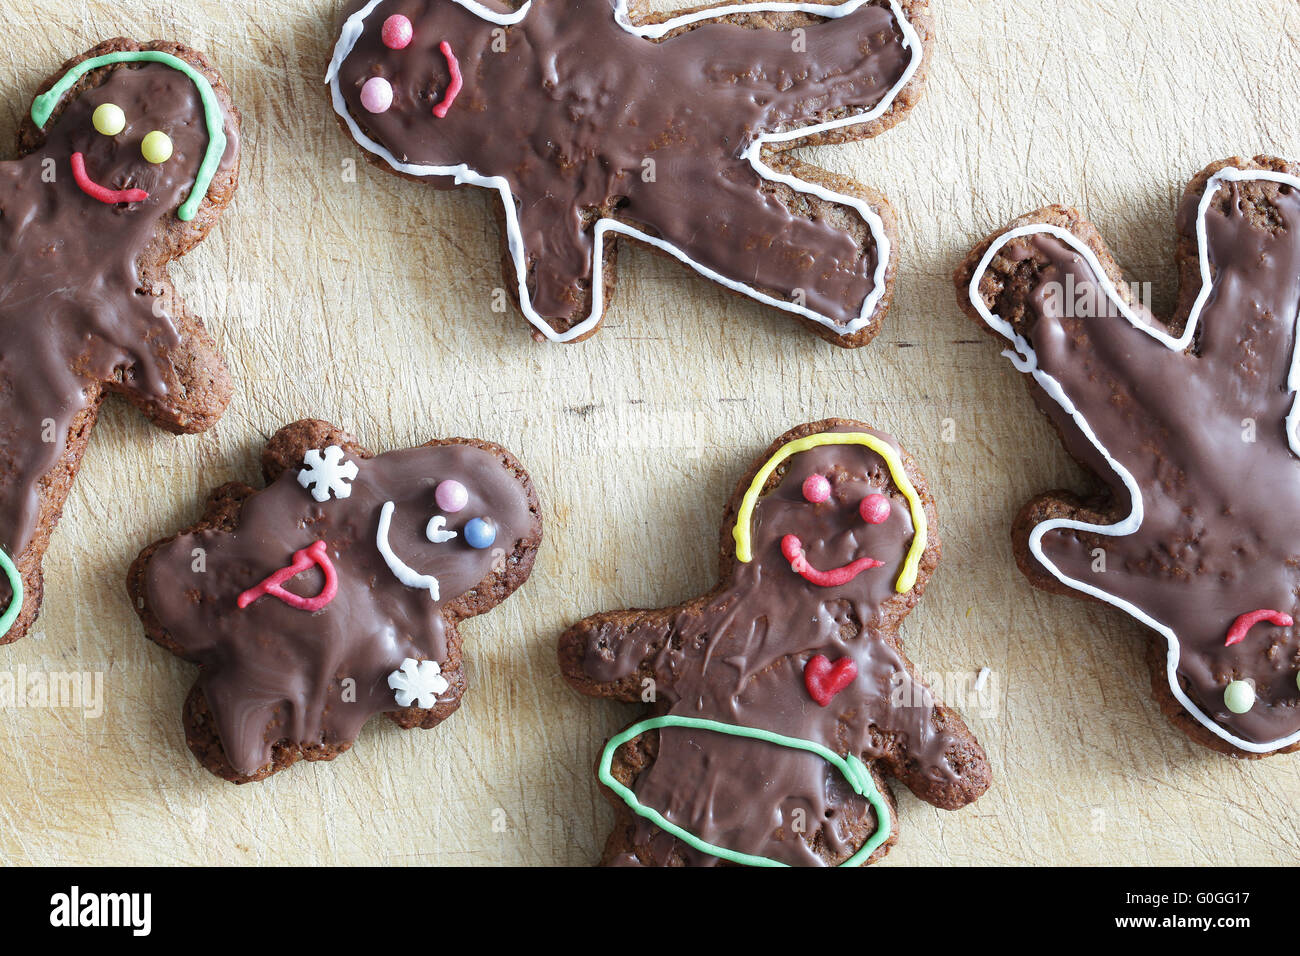 Handmade decorated gingerbread people lying on wooden table. Christmas Stock Photo